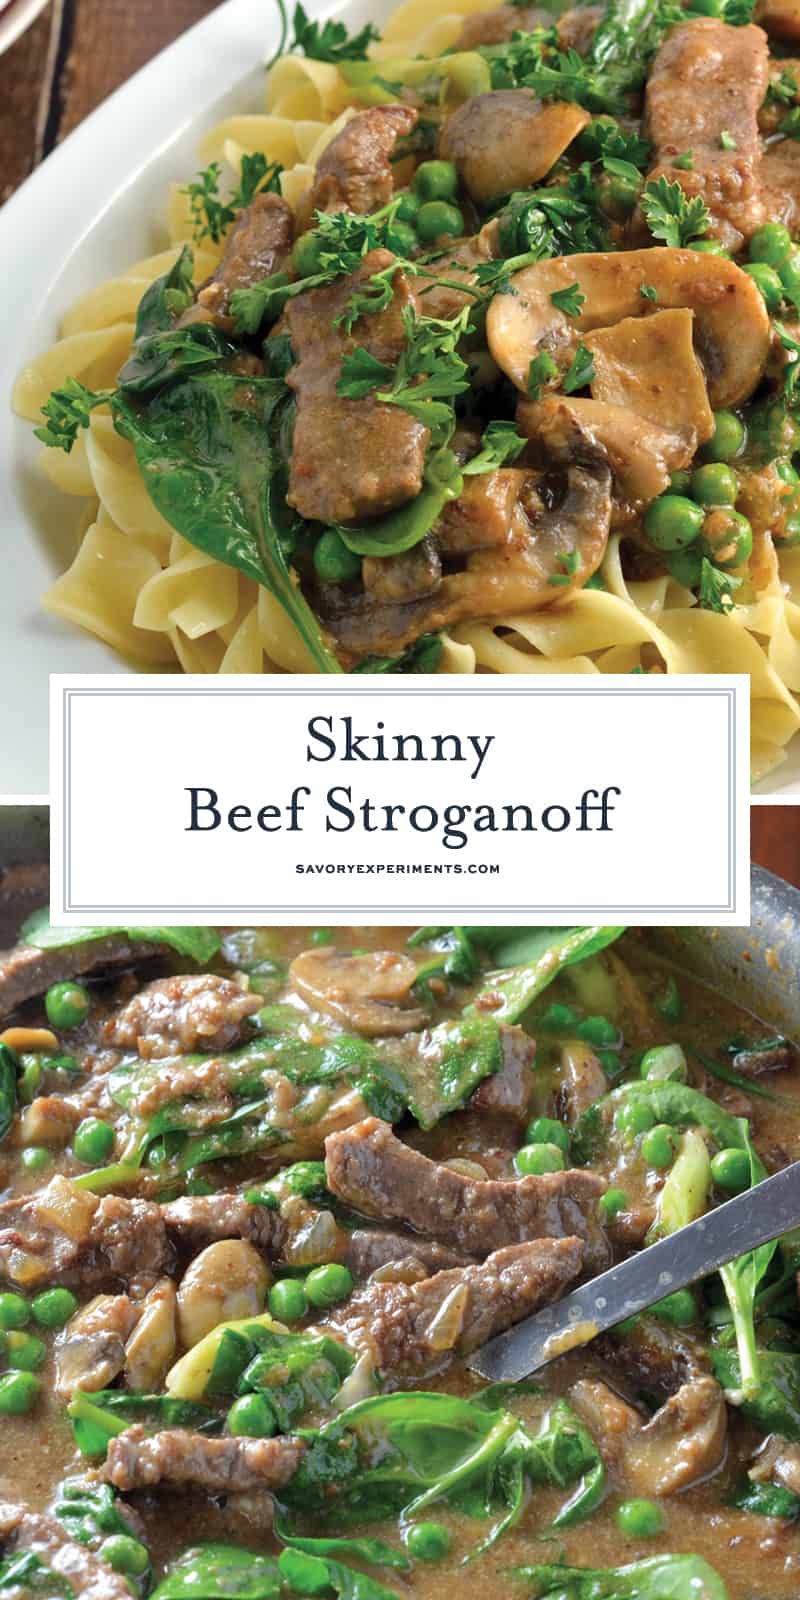 Skinny Beef Stroganoff use a secret ingredient to make this into a low calorie creamy dish. Add peas and spinach for extra veggie! #beefstroganoff www.savoryexperiments.com 